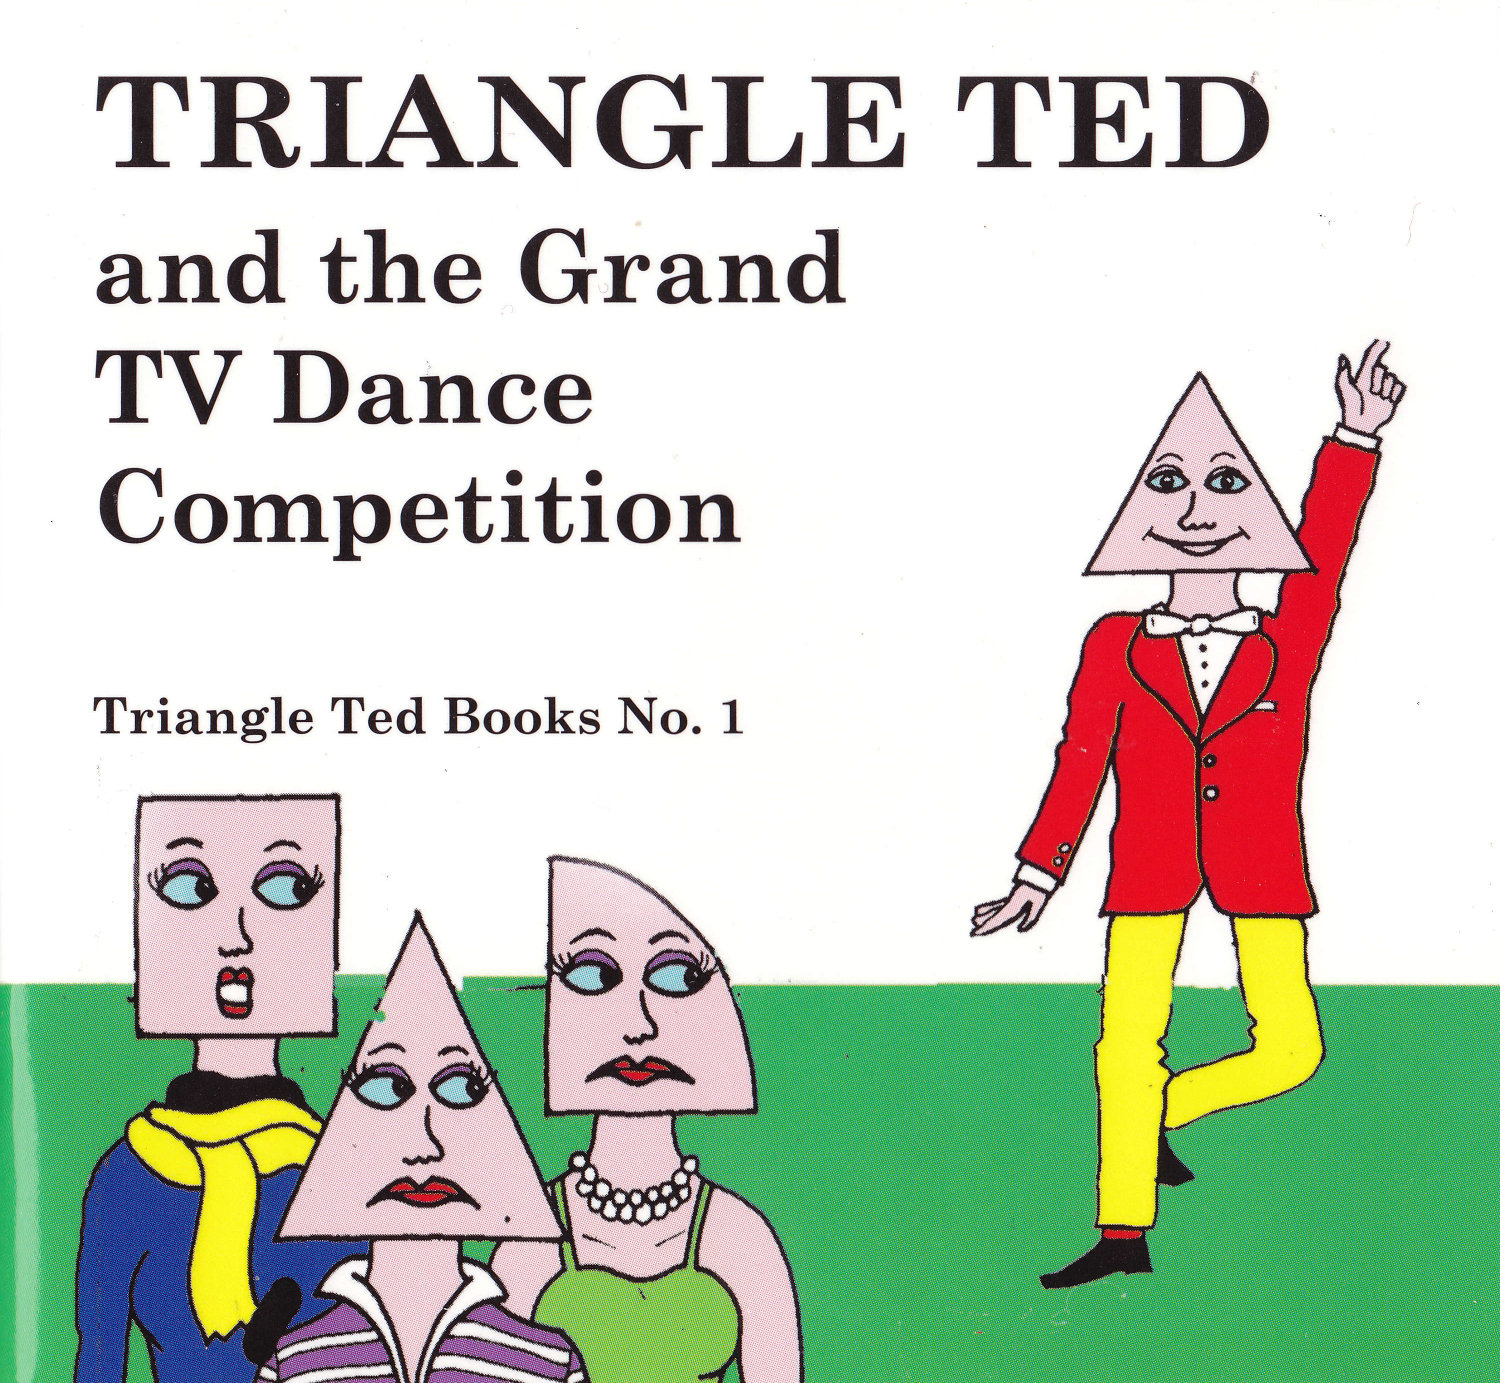 Image of TRIANGLE TED and the Grand TV Dance Competition